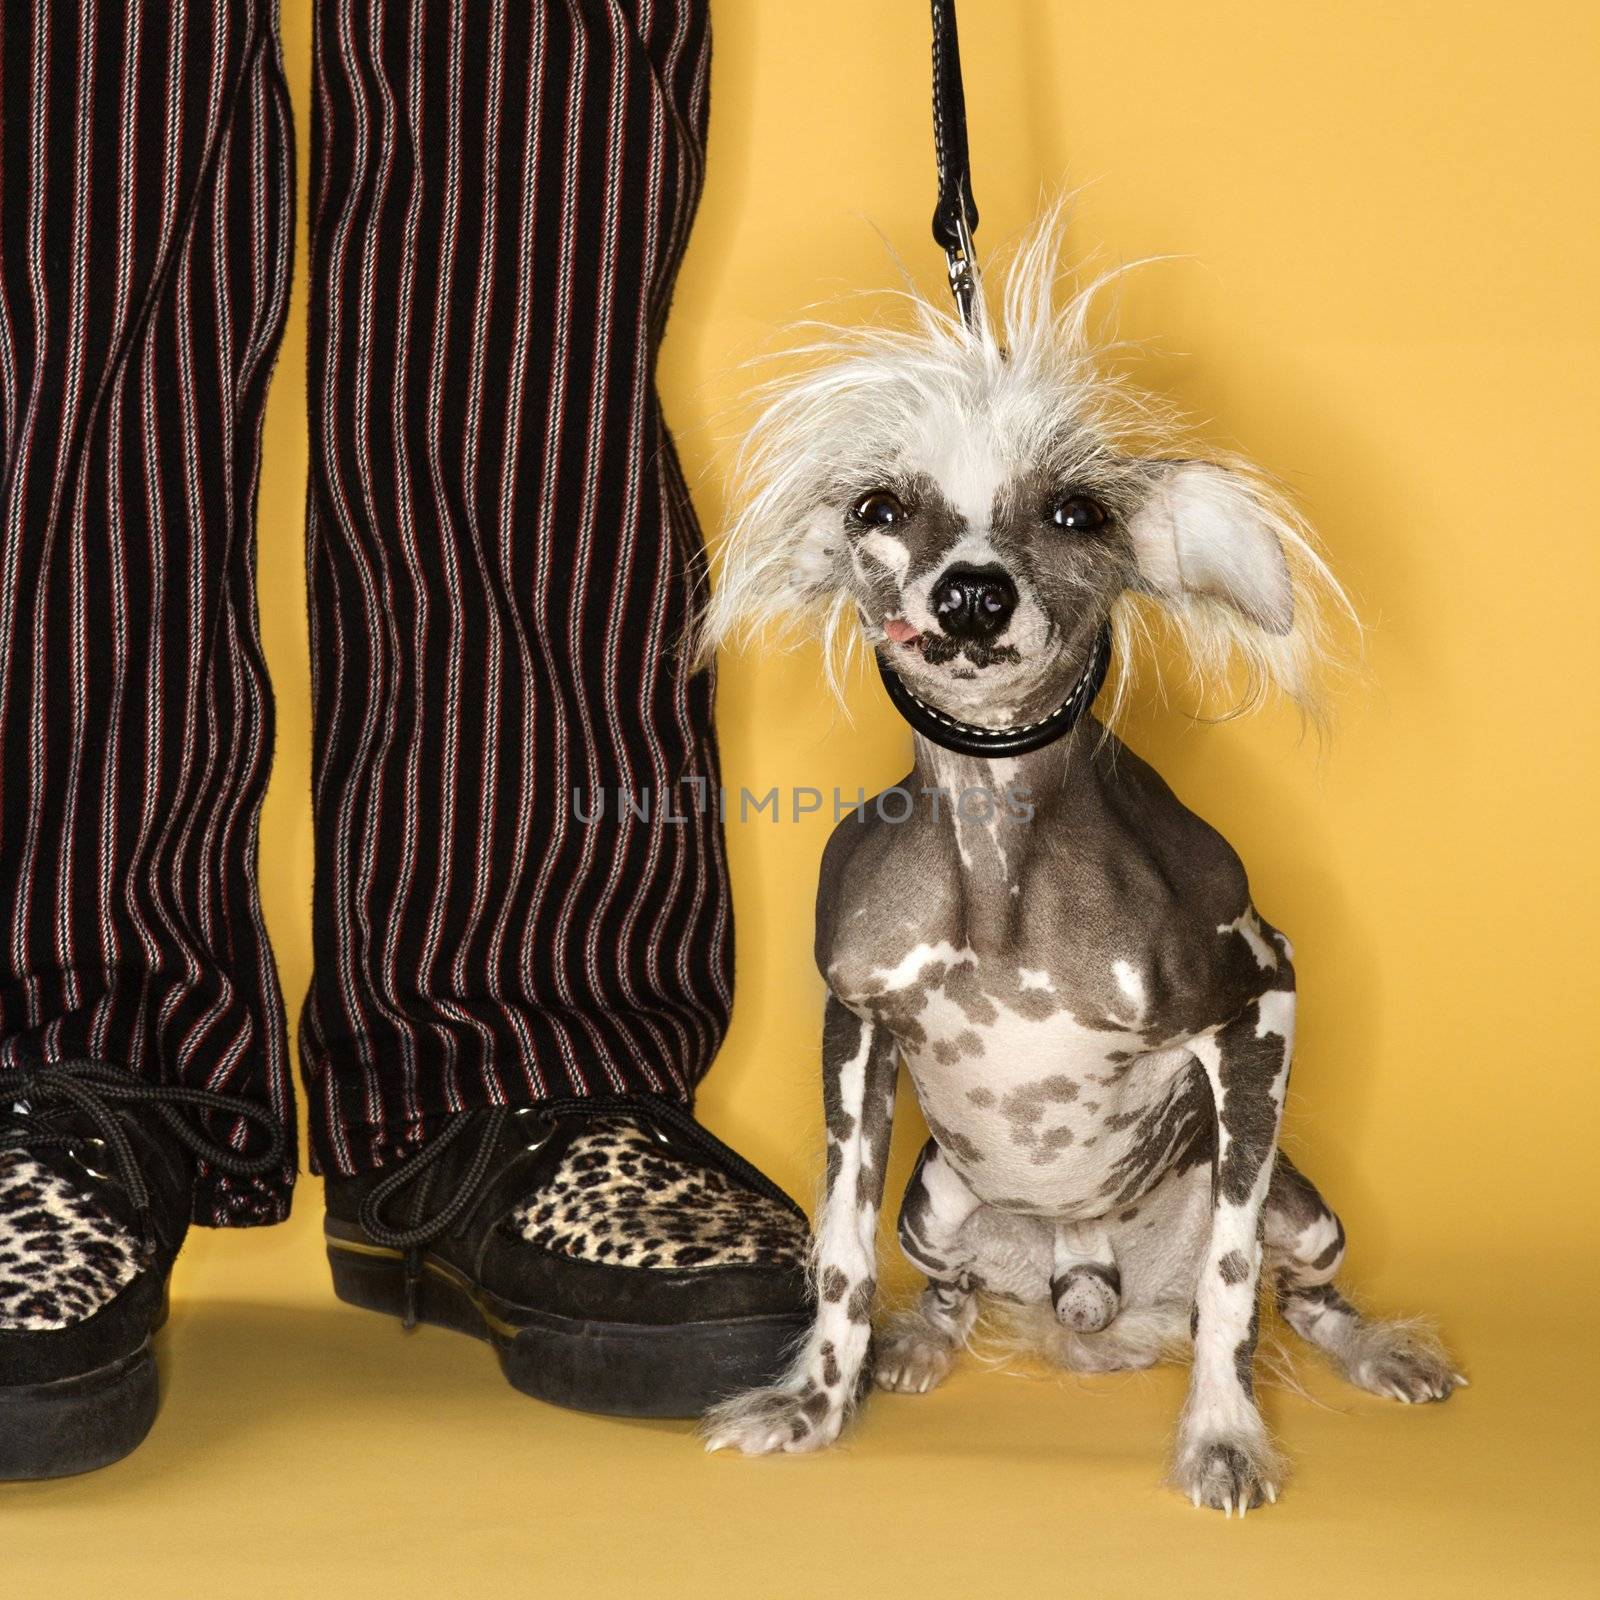 Chinese Crested dog on leash standing next to man's legs.